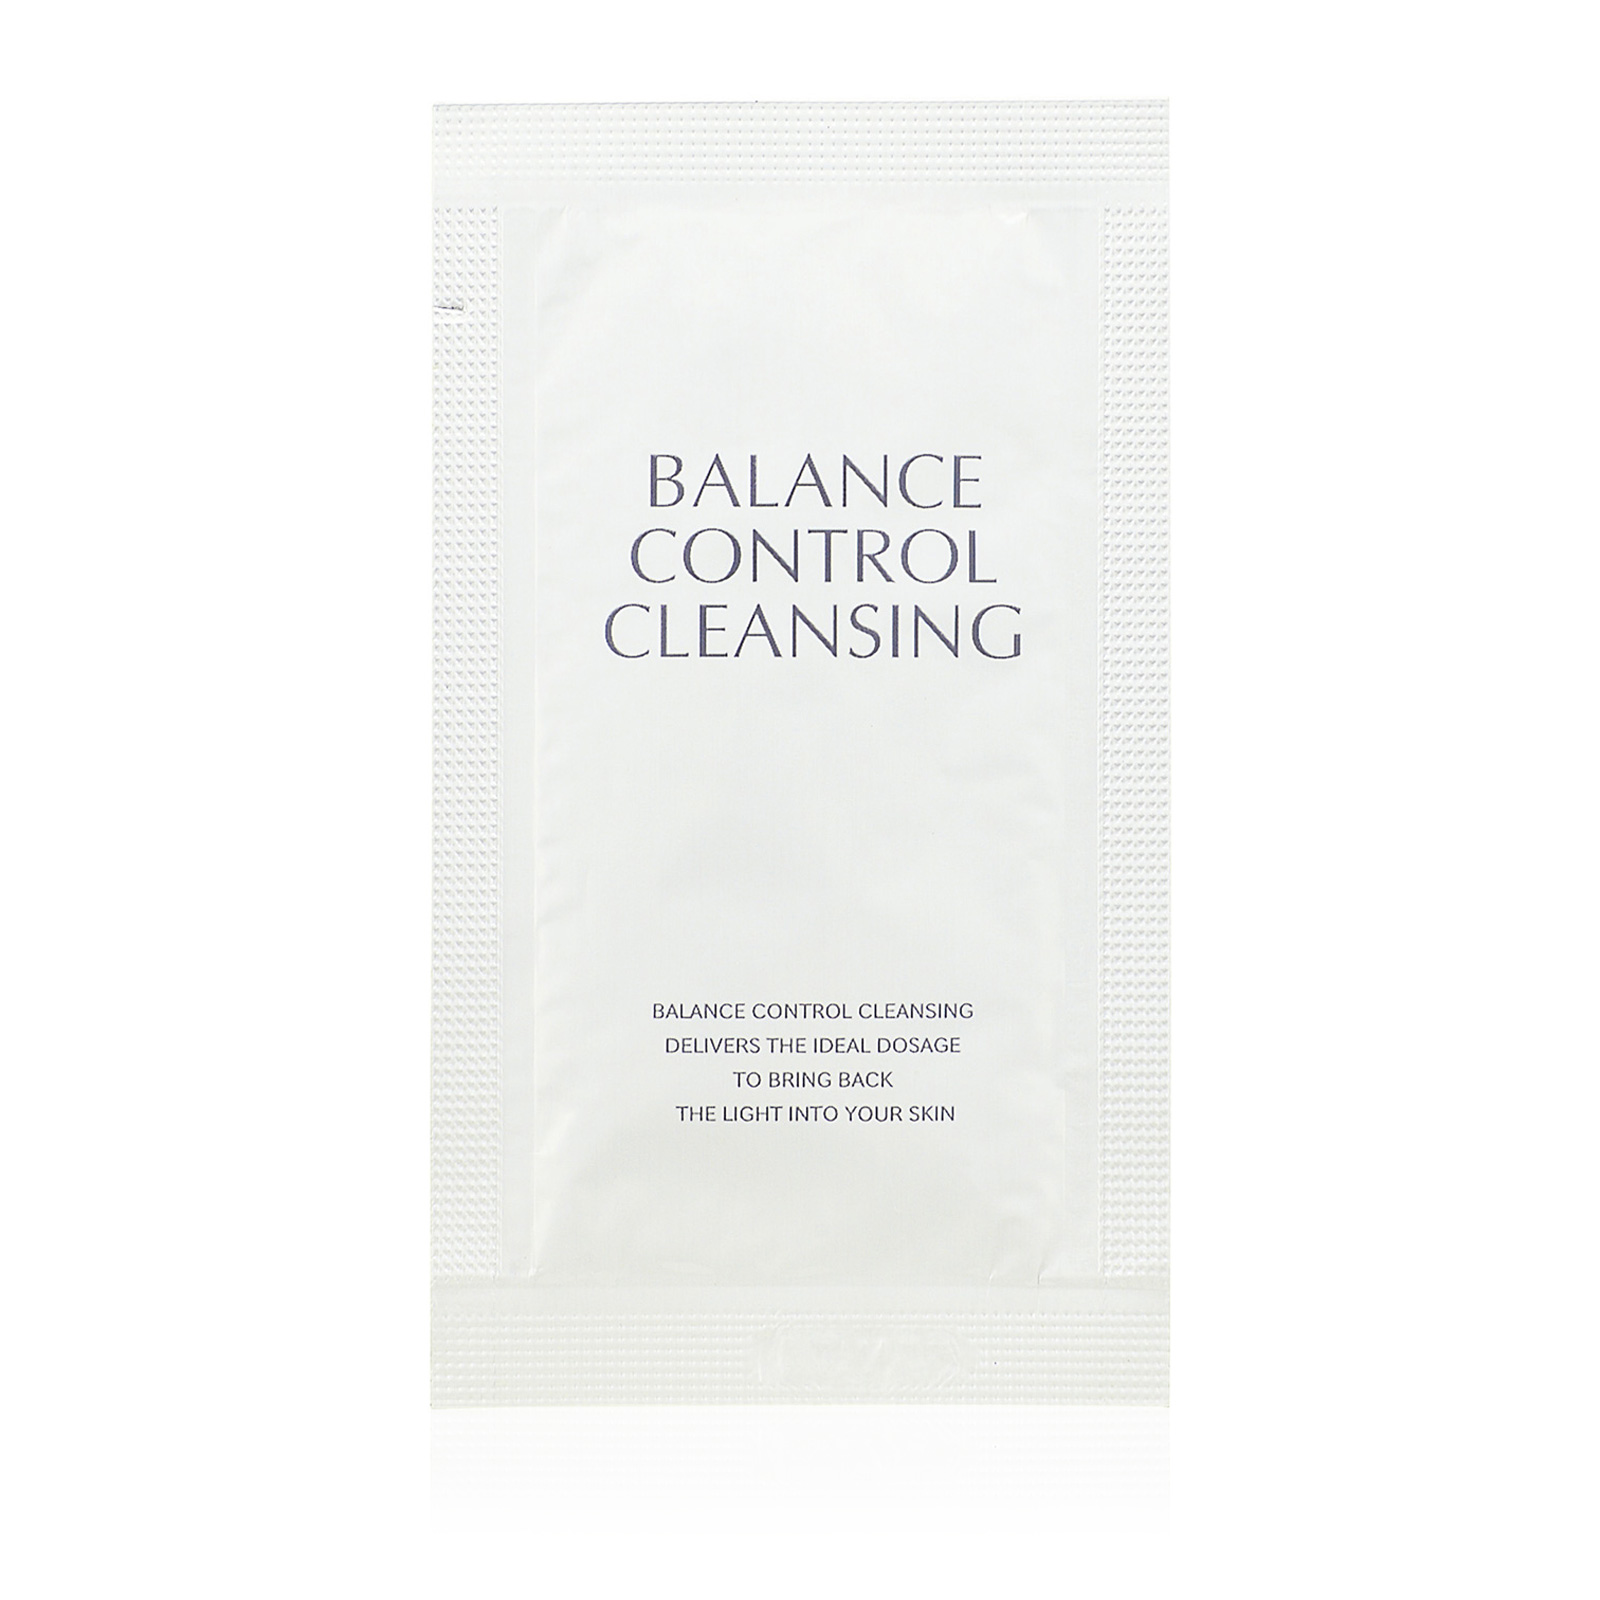 Balance Control Cleansing